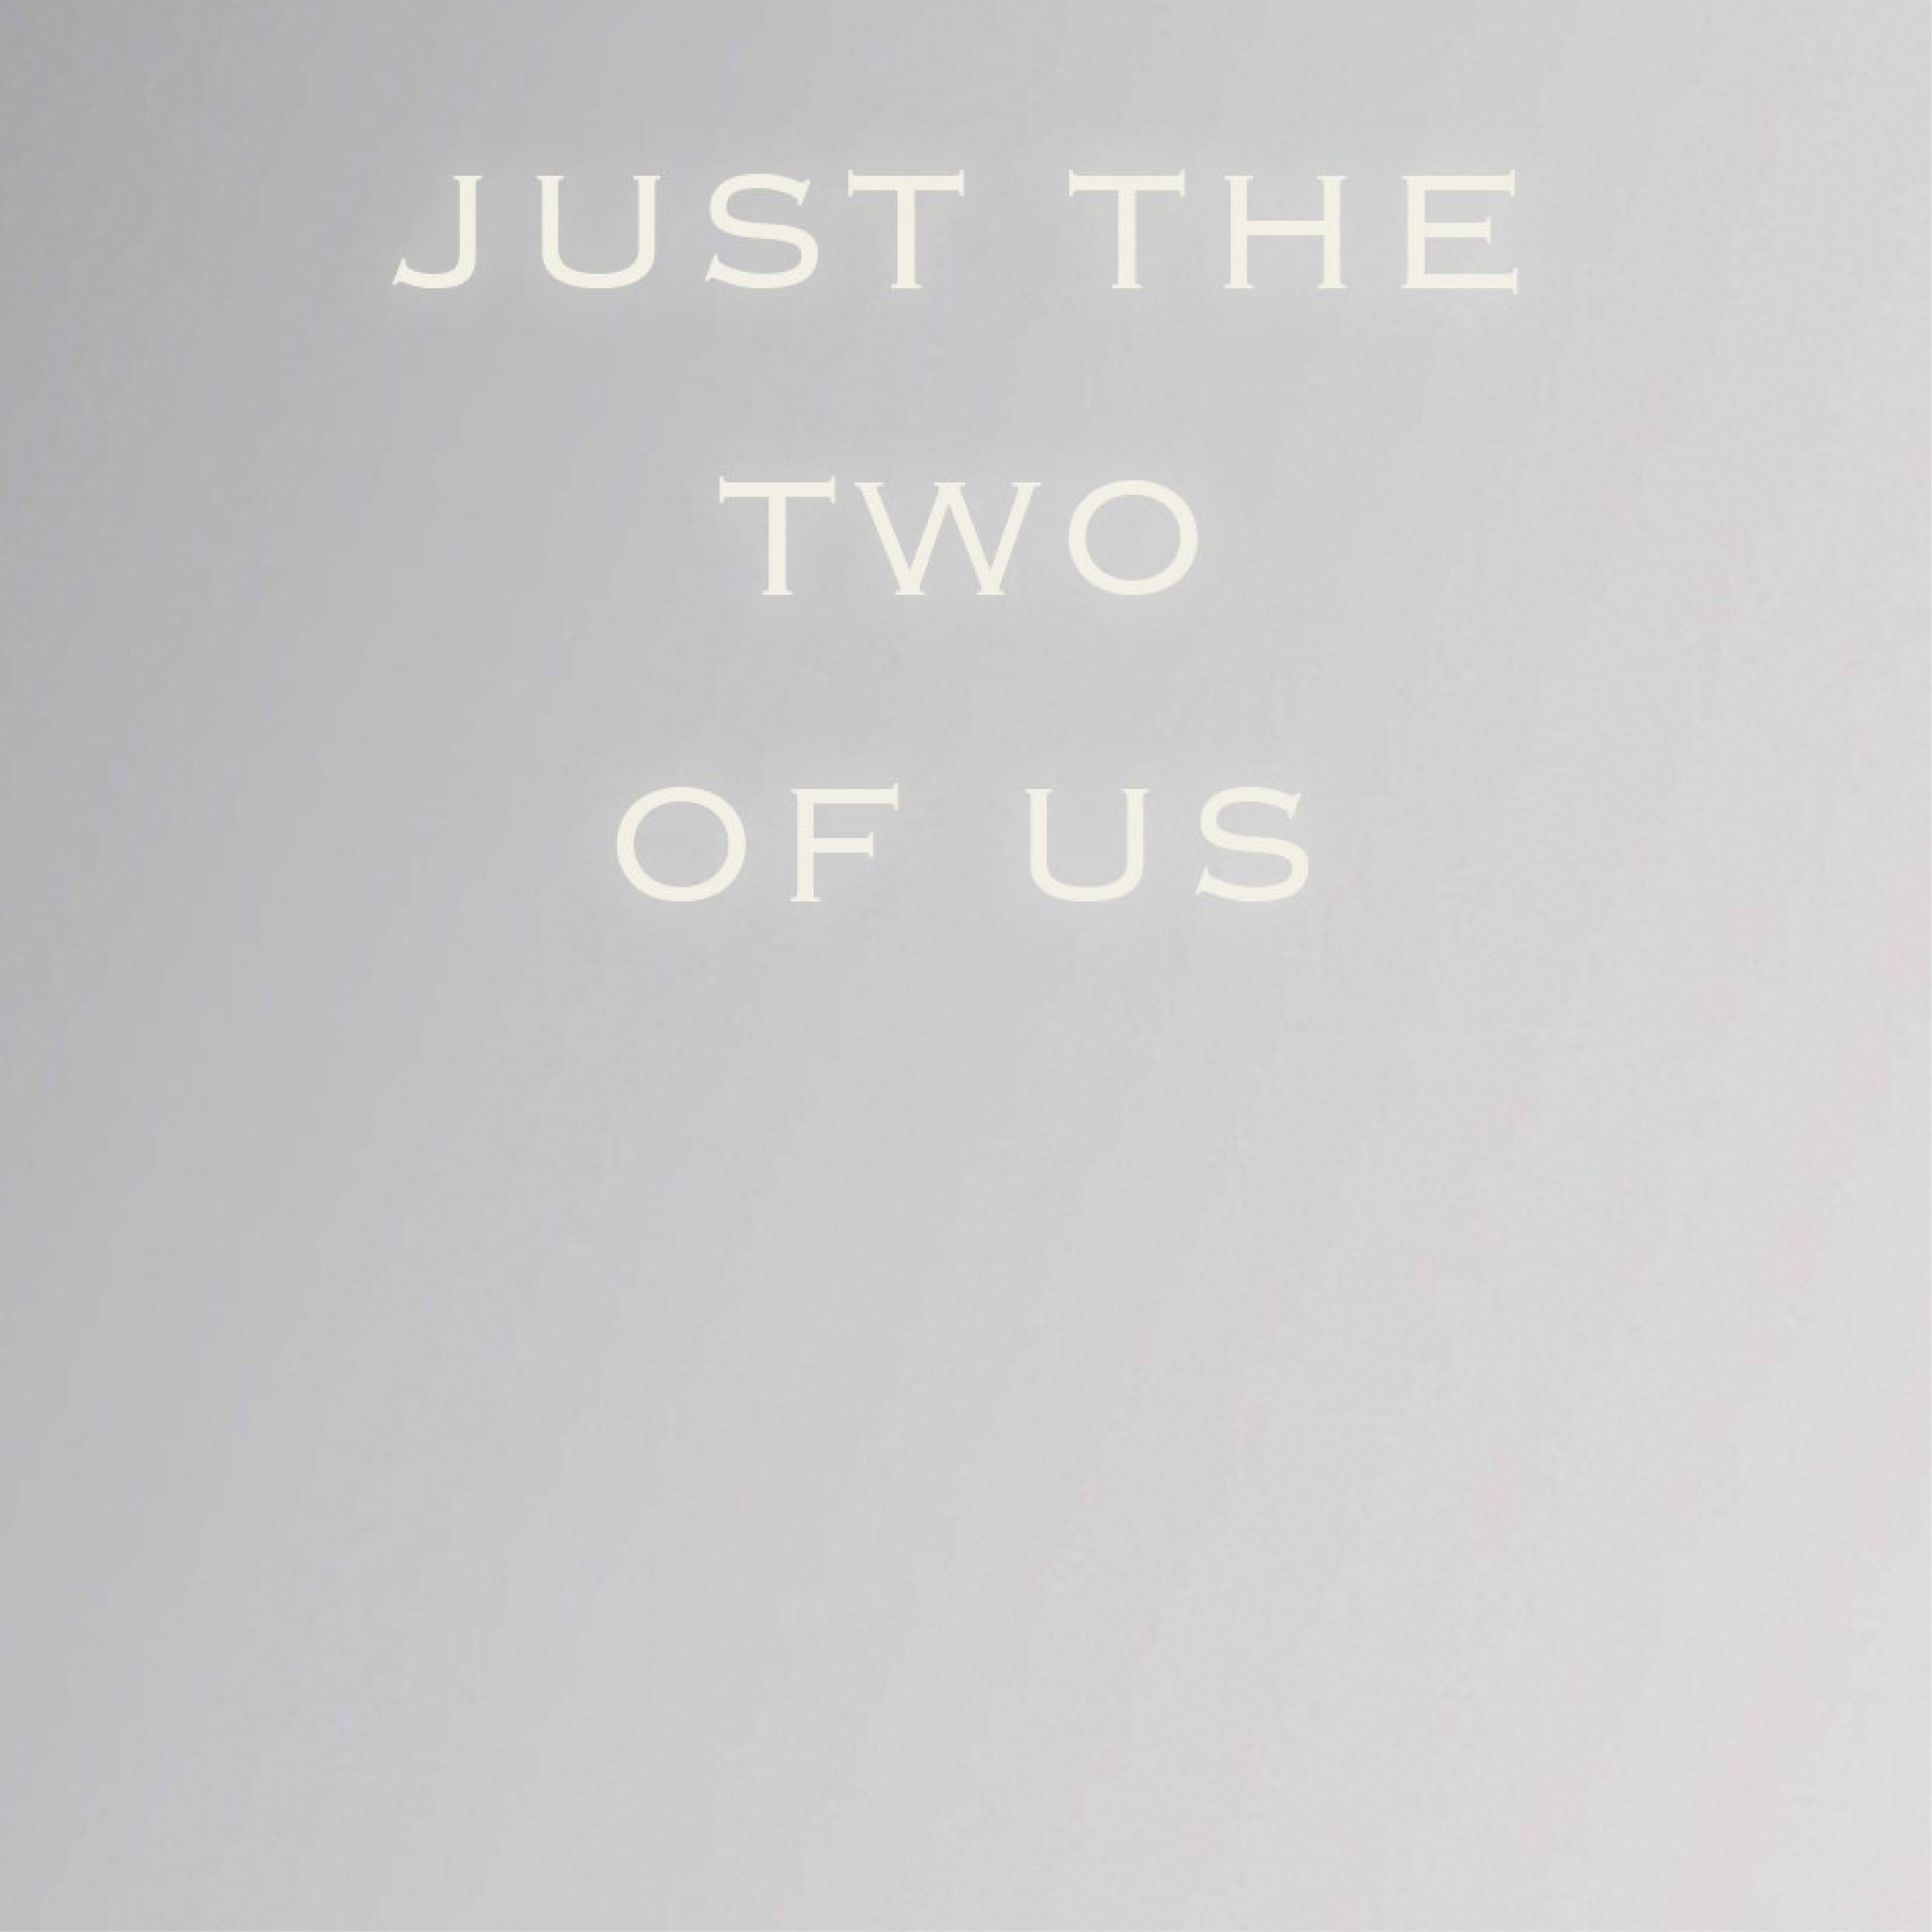 JUST THE TWO OF US by Andy Kassier